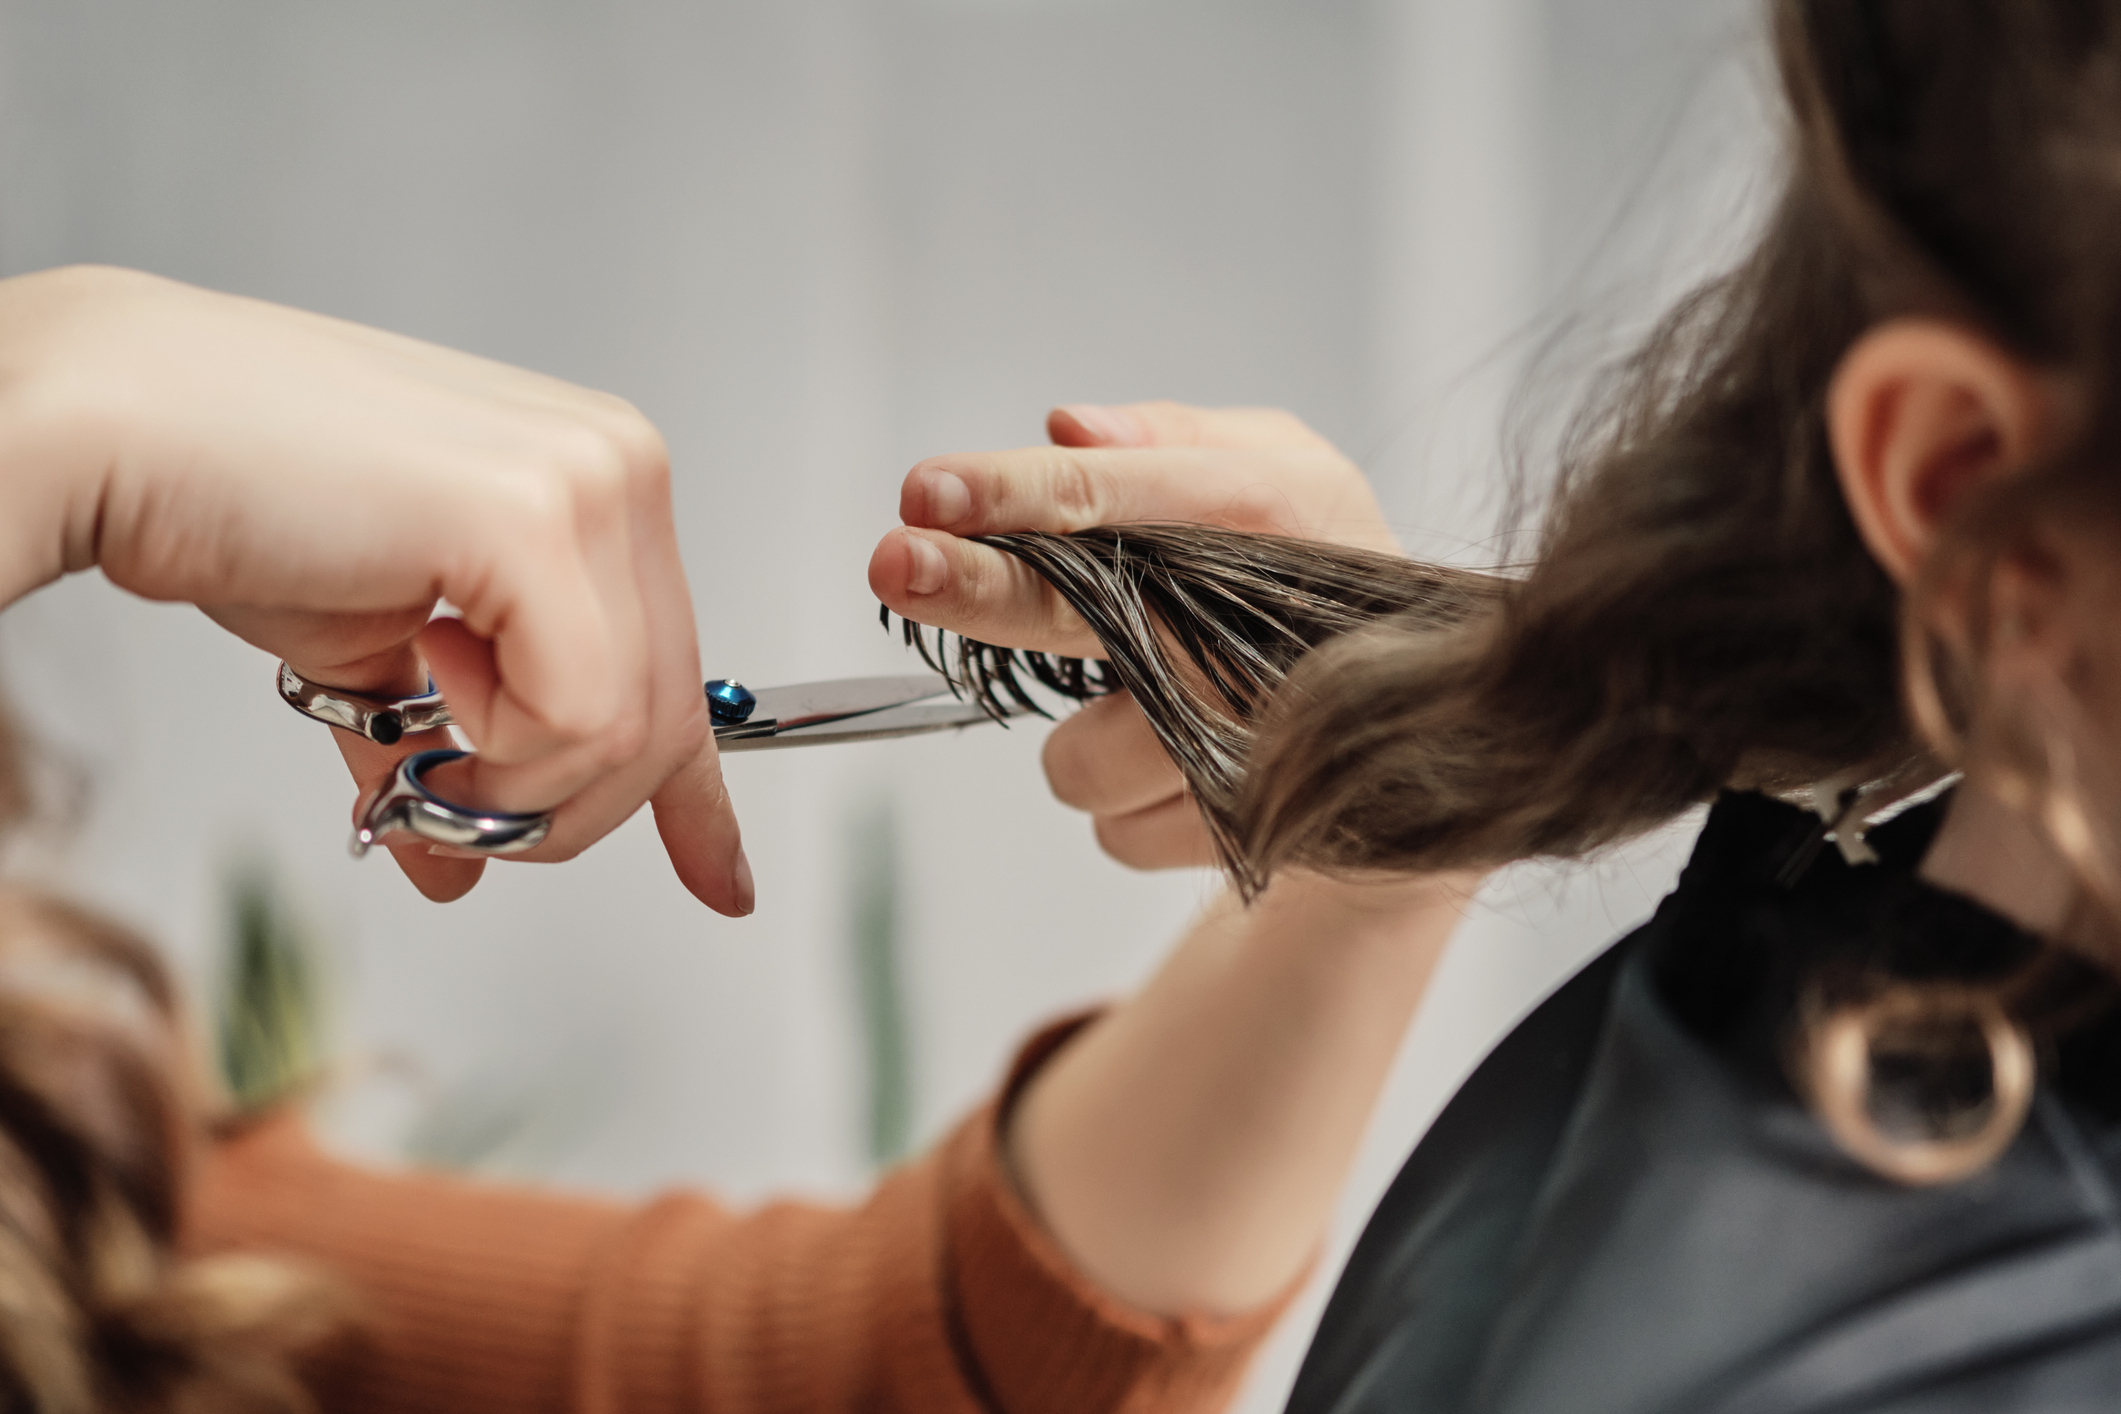 Person getting a haircut with scissors, focus on hands and hair, no faces shown